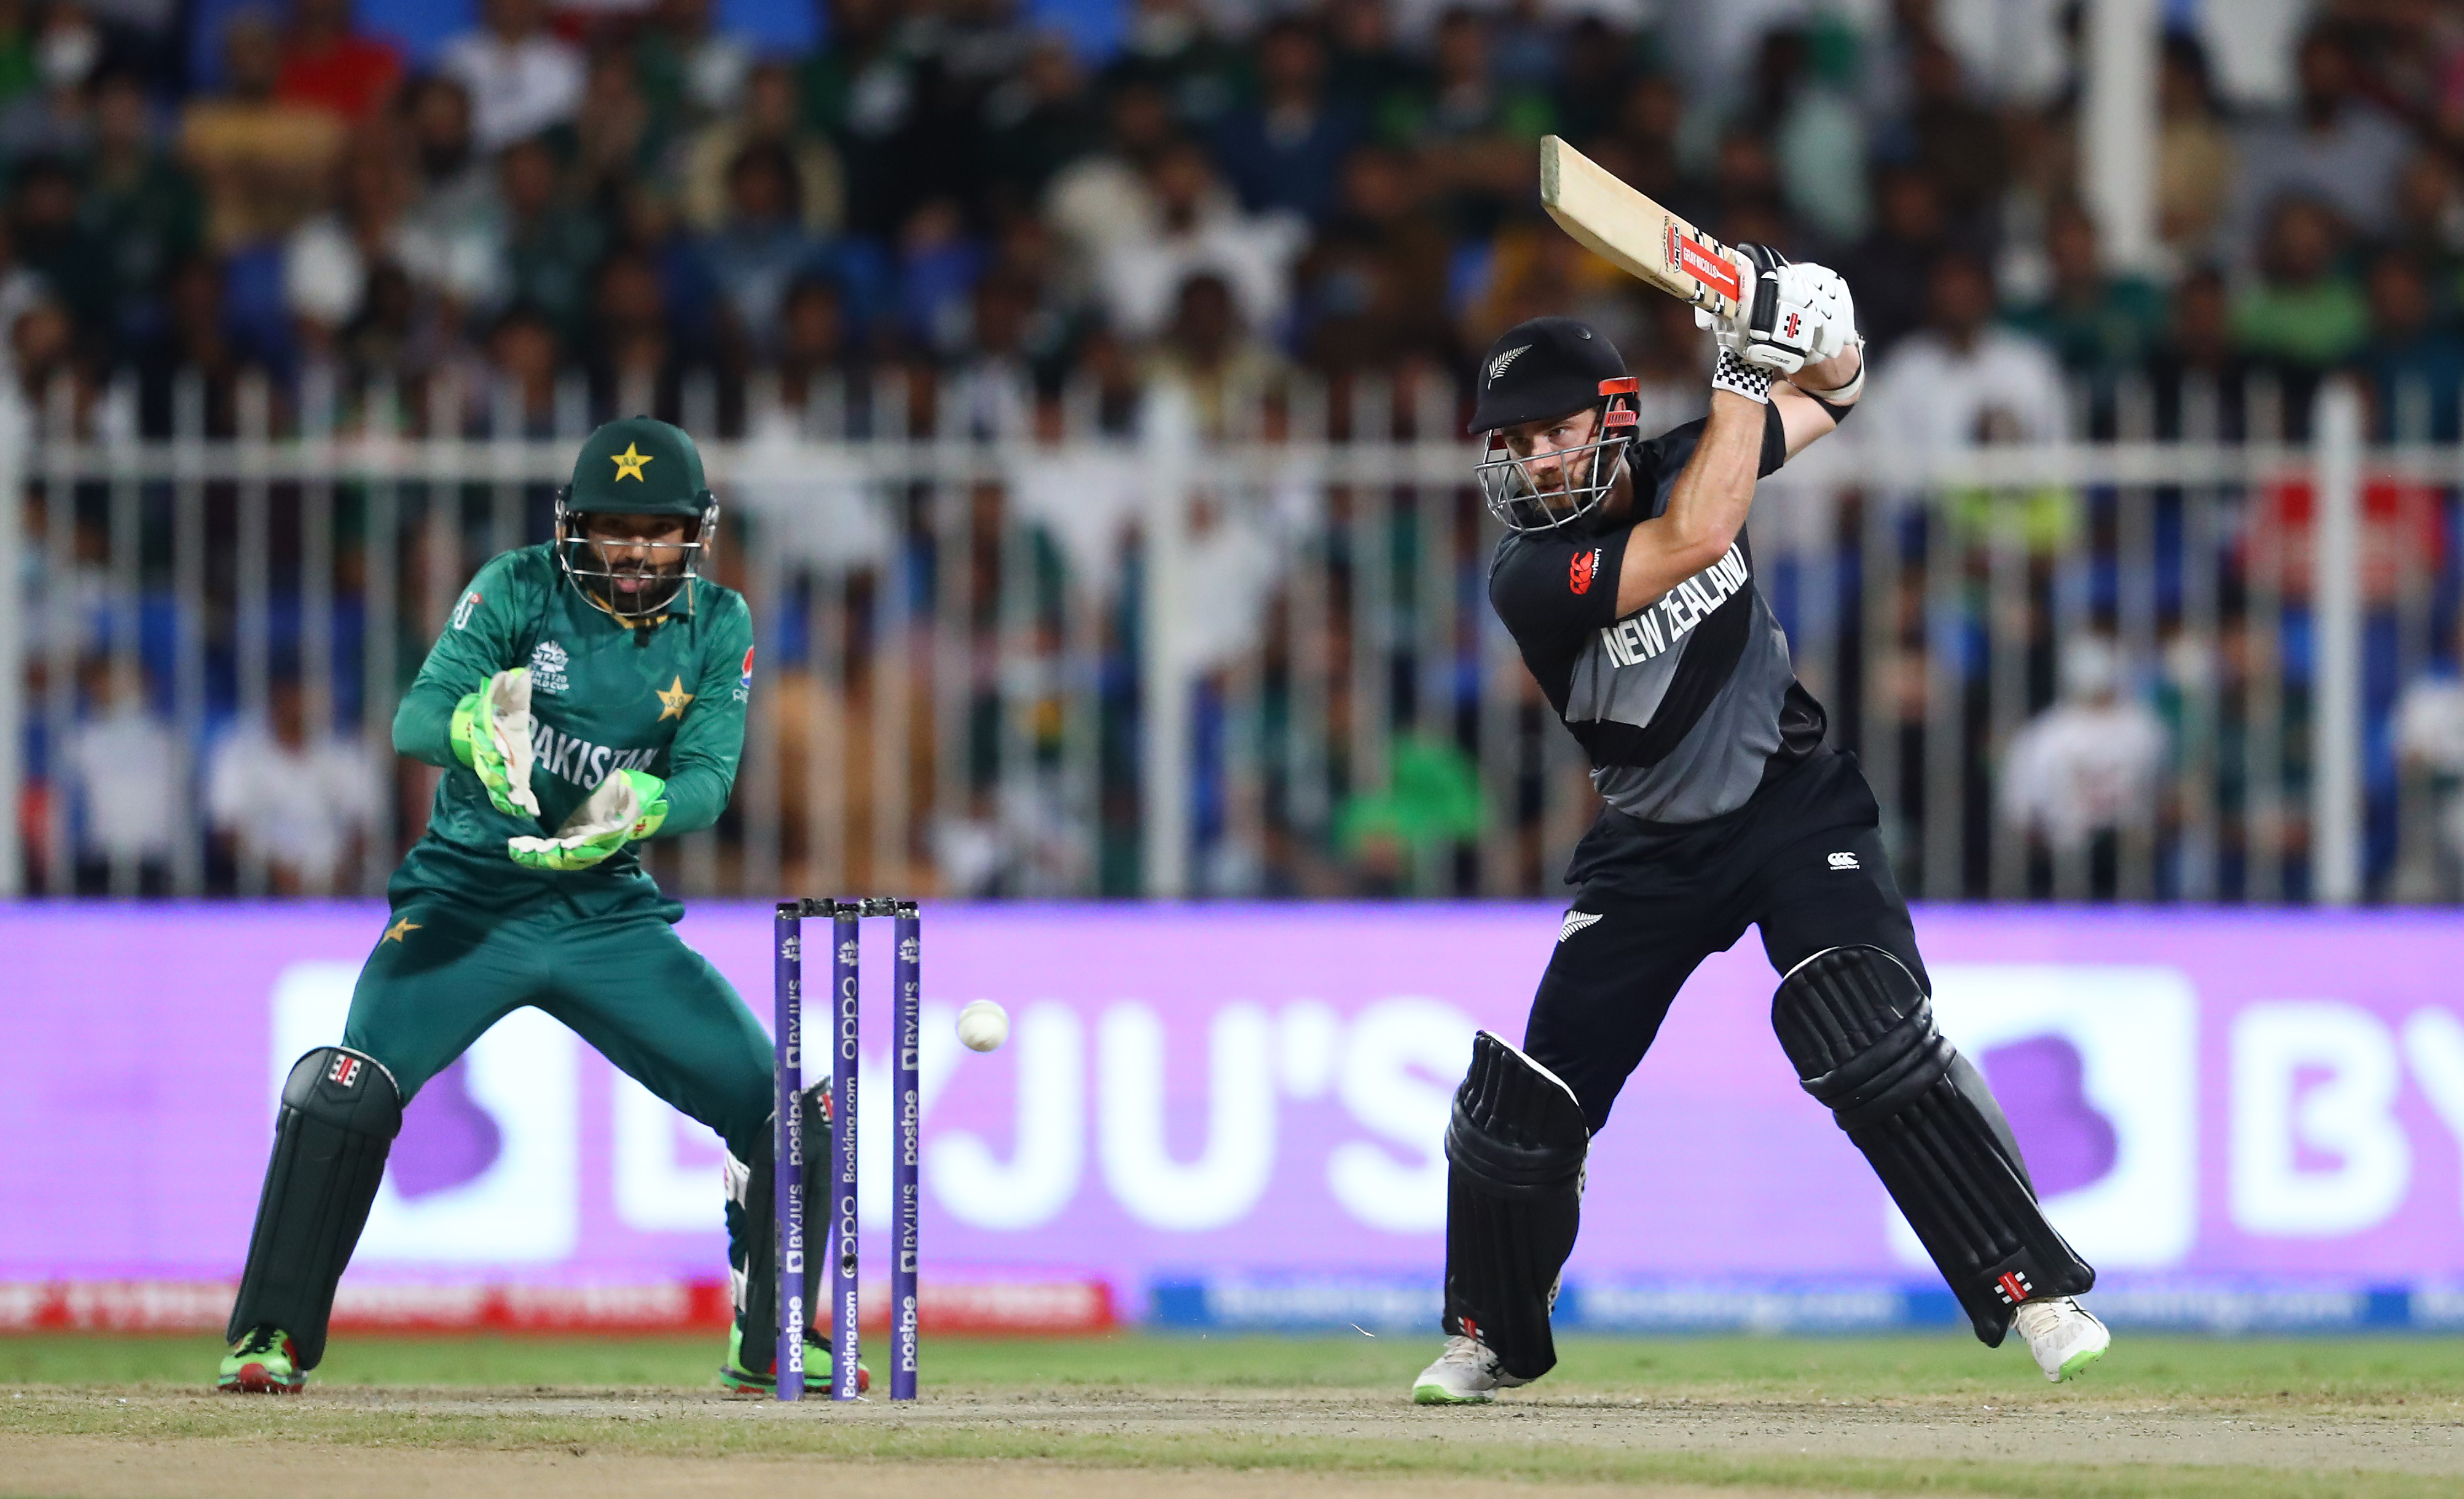 PAK vs NZ New Zealand to tour Pakistan in 2023 for five ODIs and five T20Is